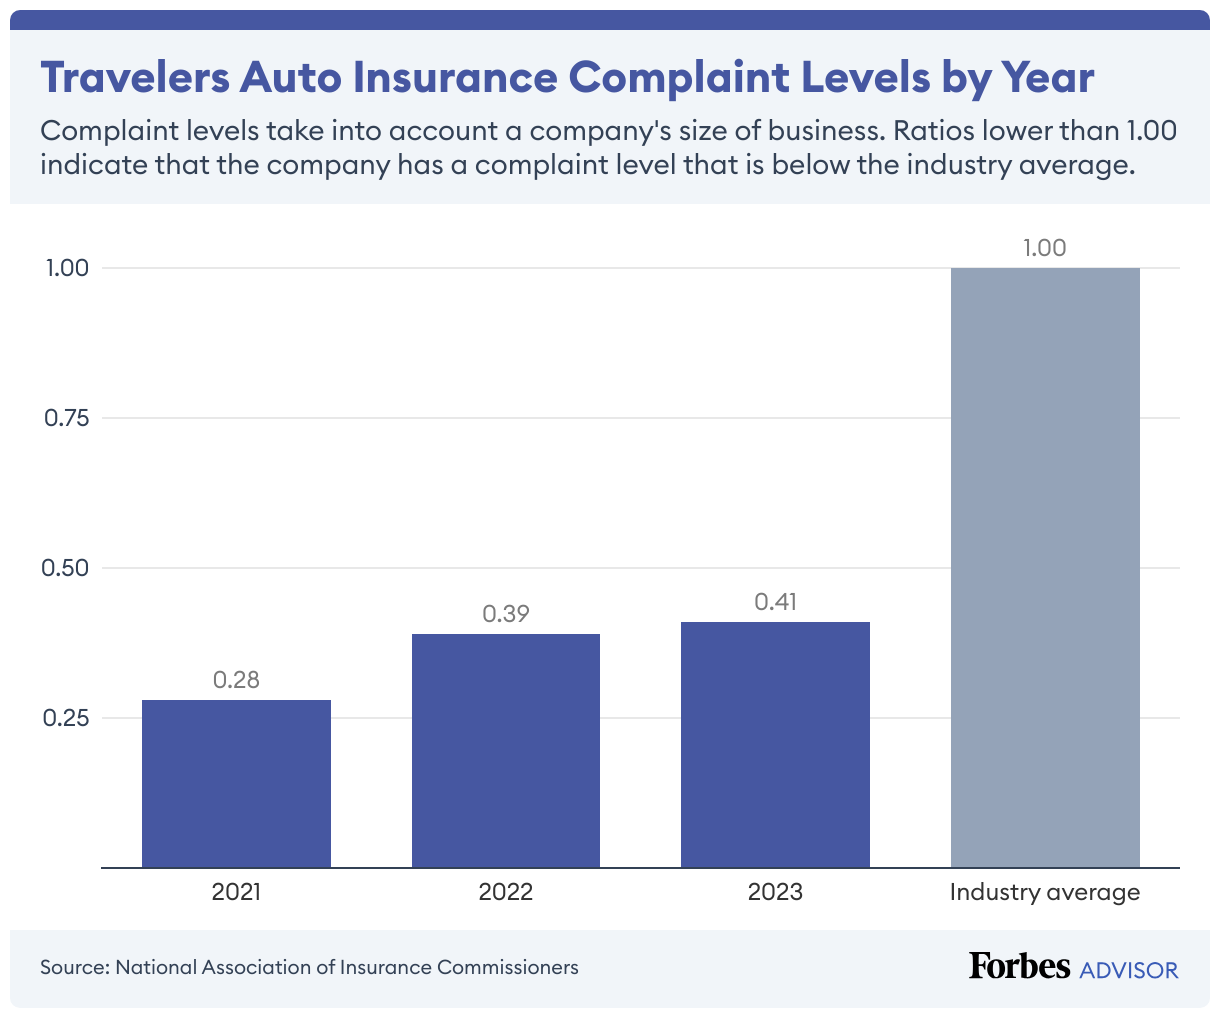 Travelers' car insurance complaint level has been very low the last three years.